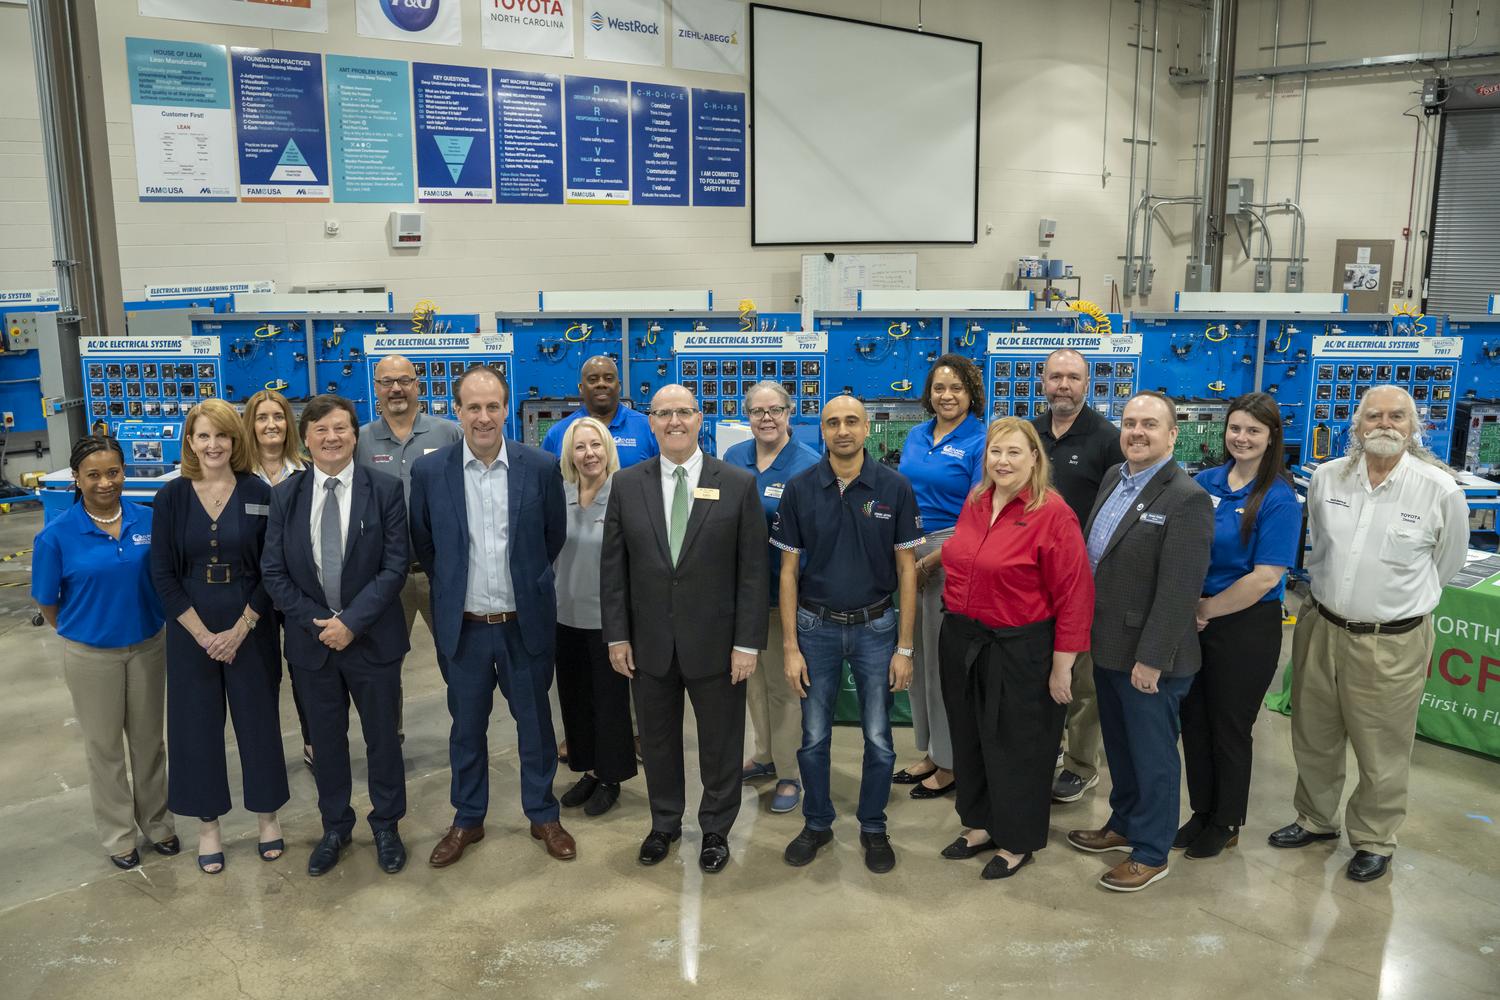 GTCC staff, visitors from Ireland and South Africa, FAME employees, and Guilford County Schools employees pose for a group photo inside GTCC's FAME space in the Center for Advanced Manufacturing.